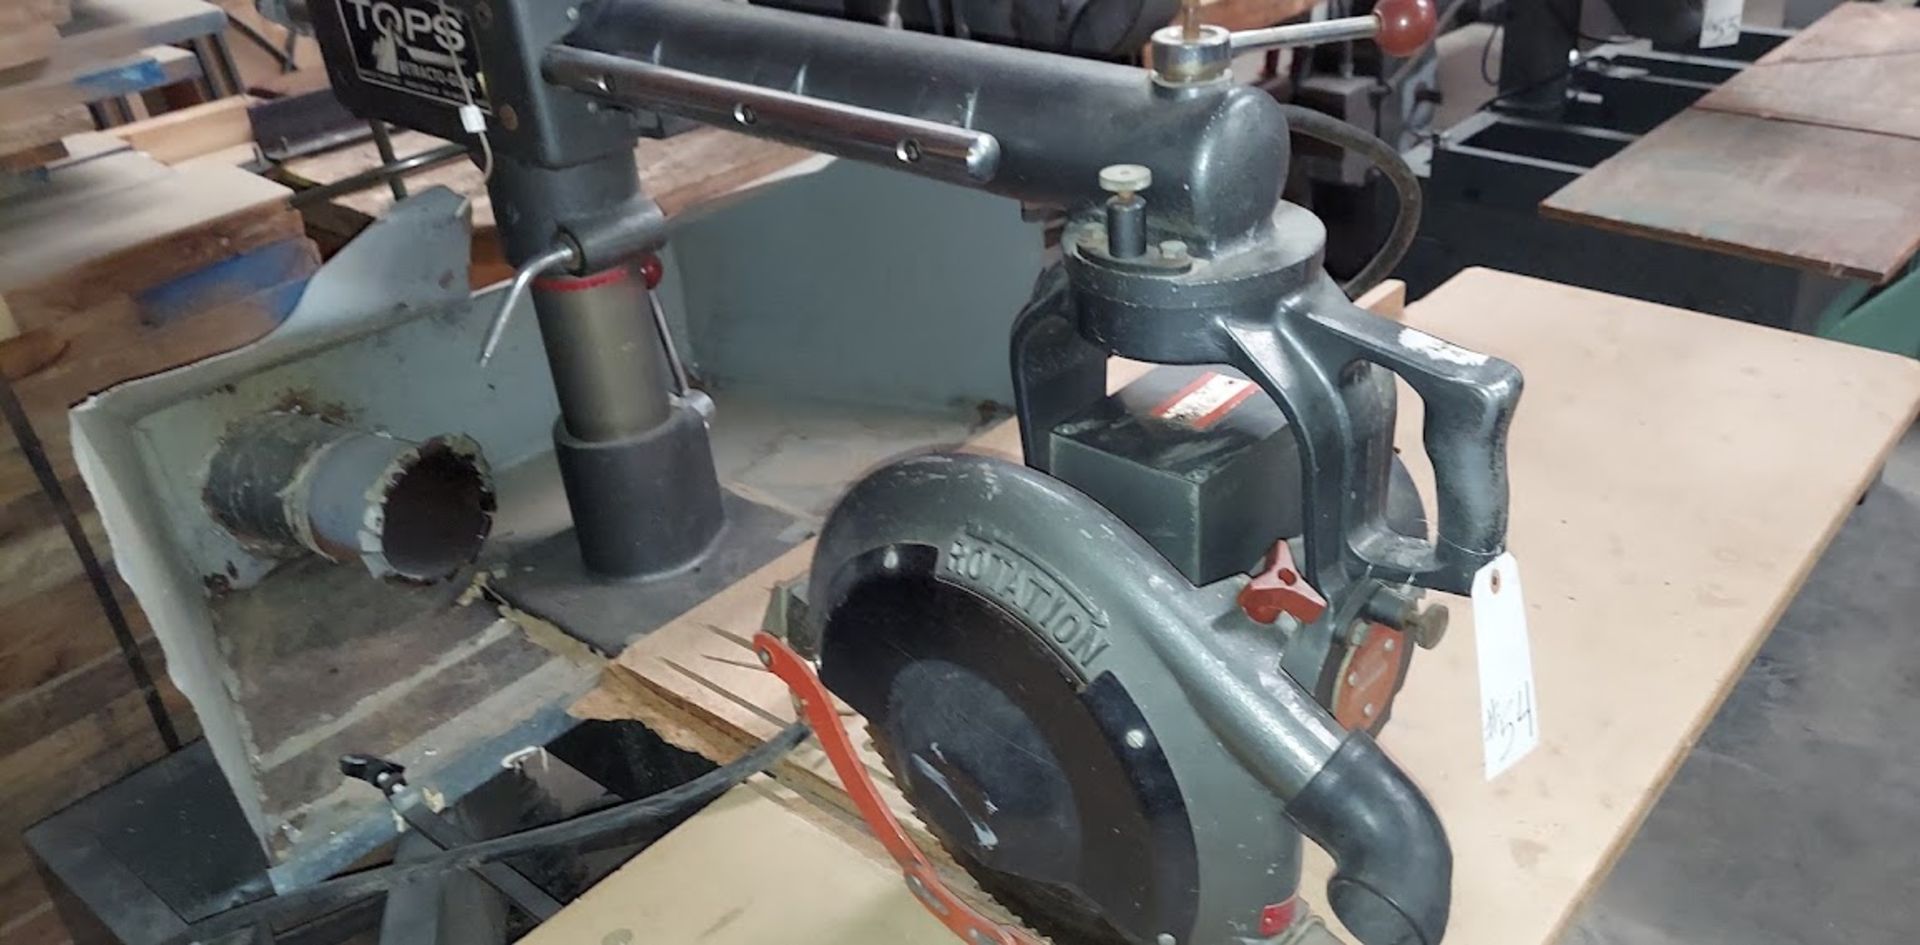 Tops 14" Radial Arm Saw, Model 55508M, 3hp 3ph - Image 2 of 4